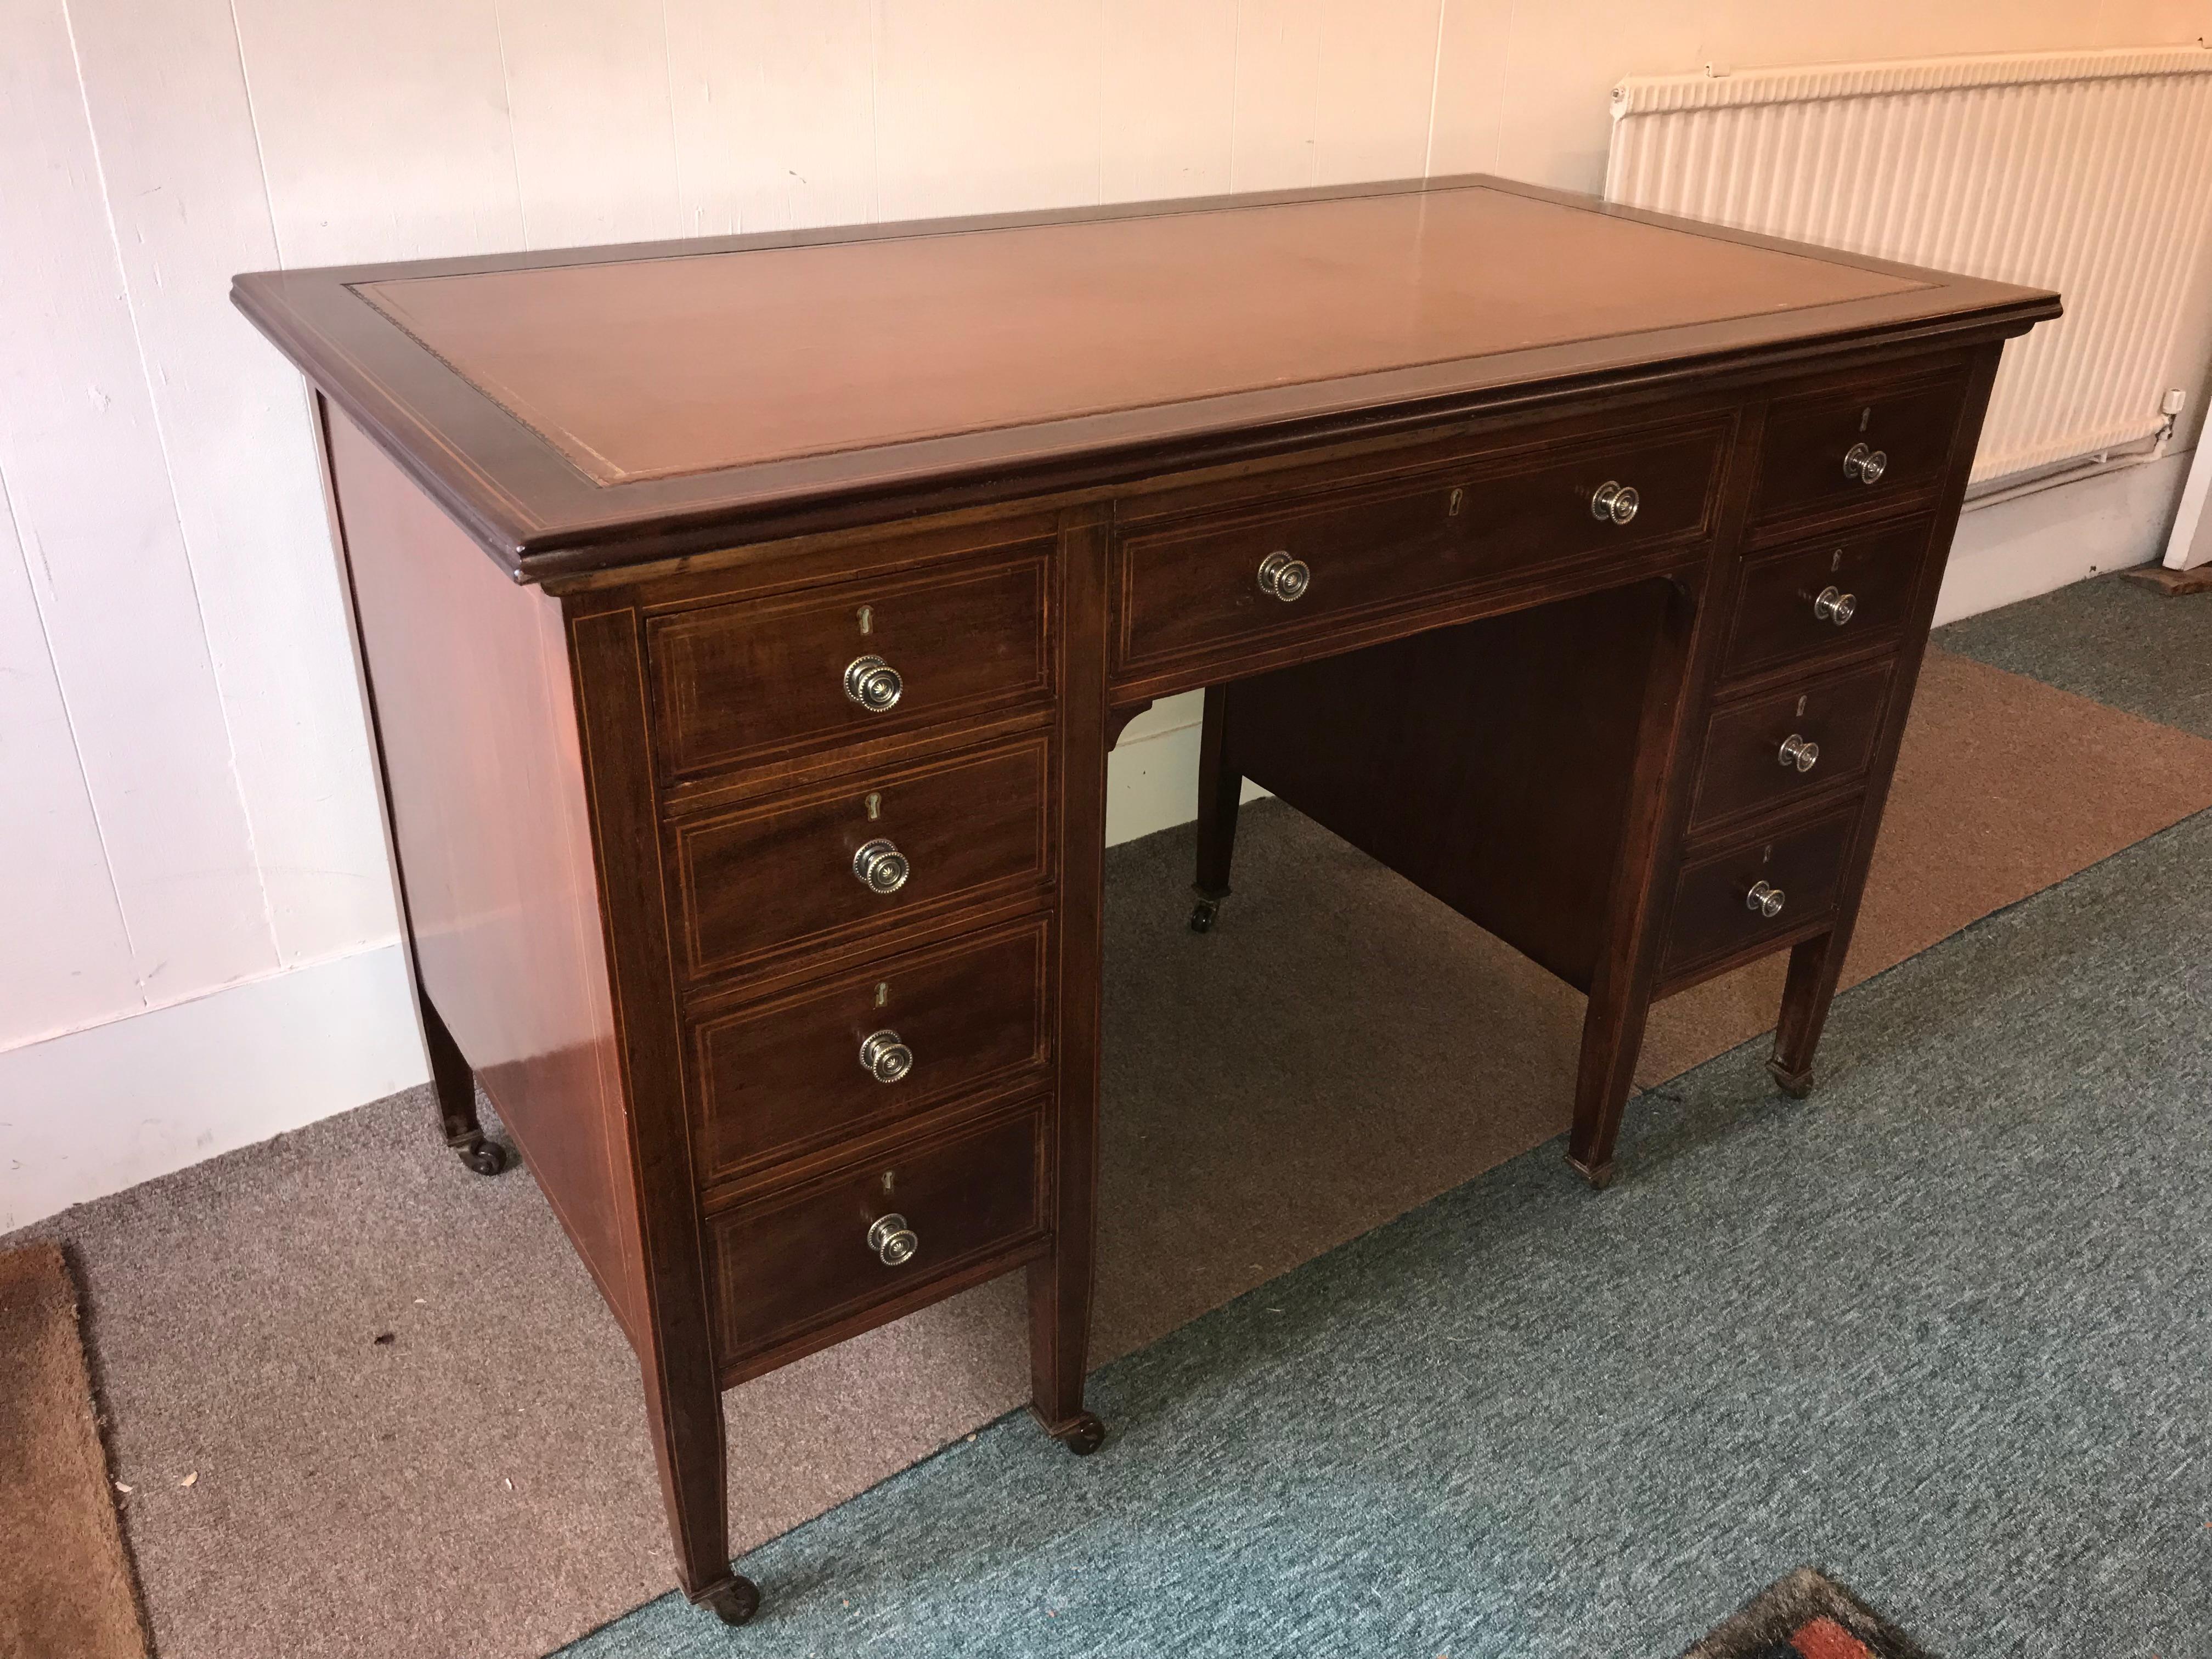 Hepplewhite style mahogany and boxwood inlaid one piece desk with nine deep drawers with brass knobs, ending on square tapered legs. This is a superior quality piece, even the side panels are inlaid. The gilt tooled leather top is in immaculate